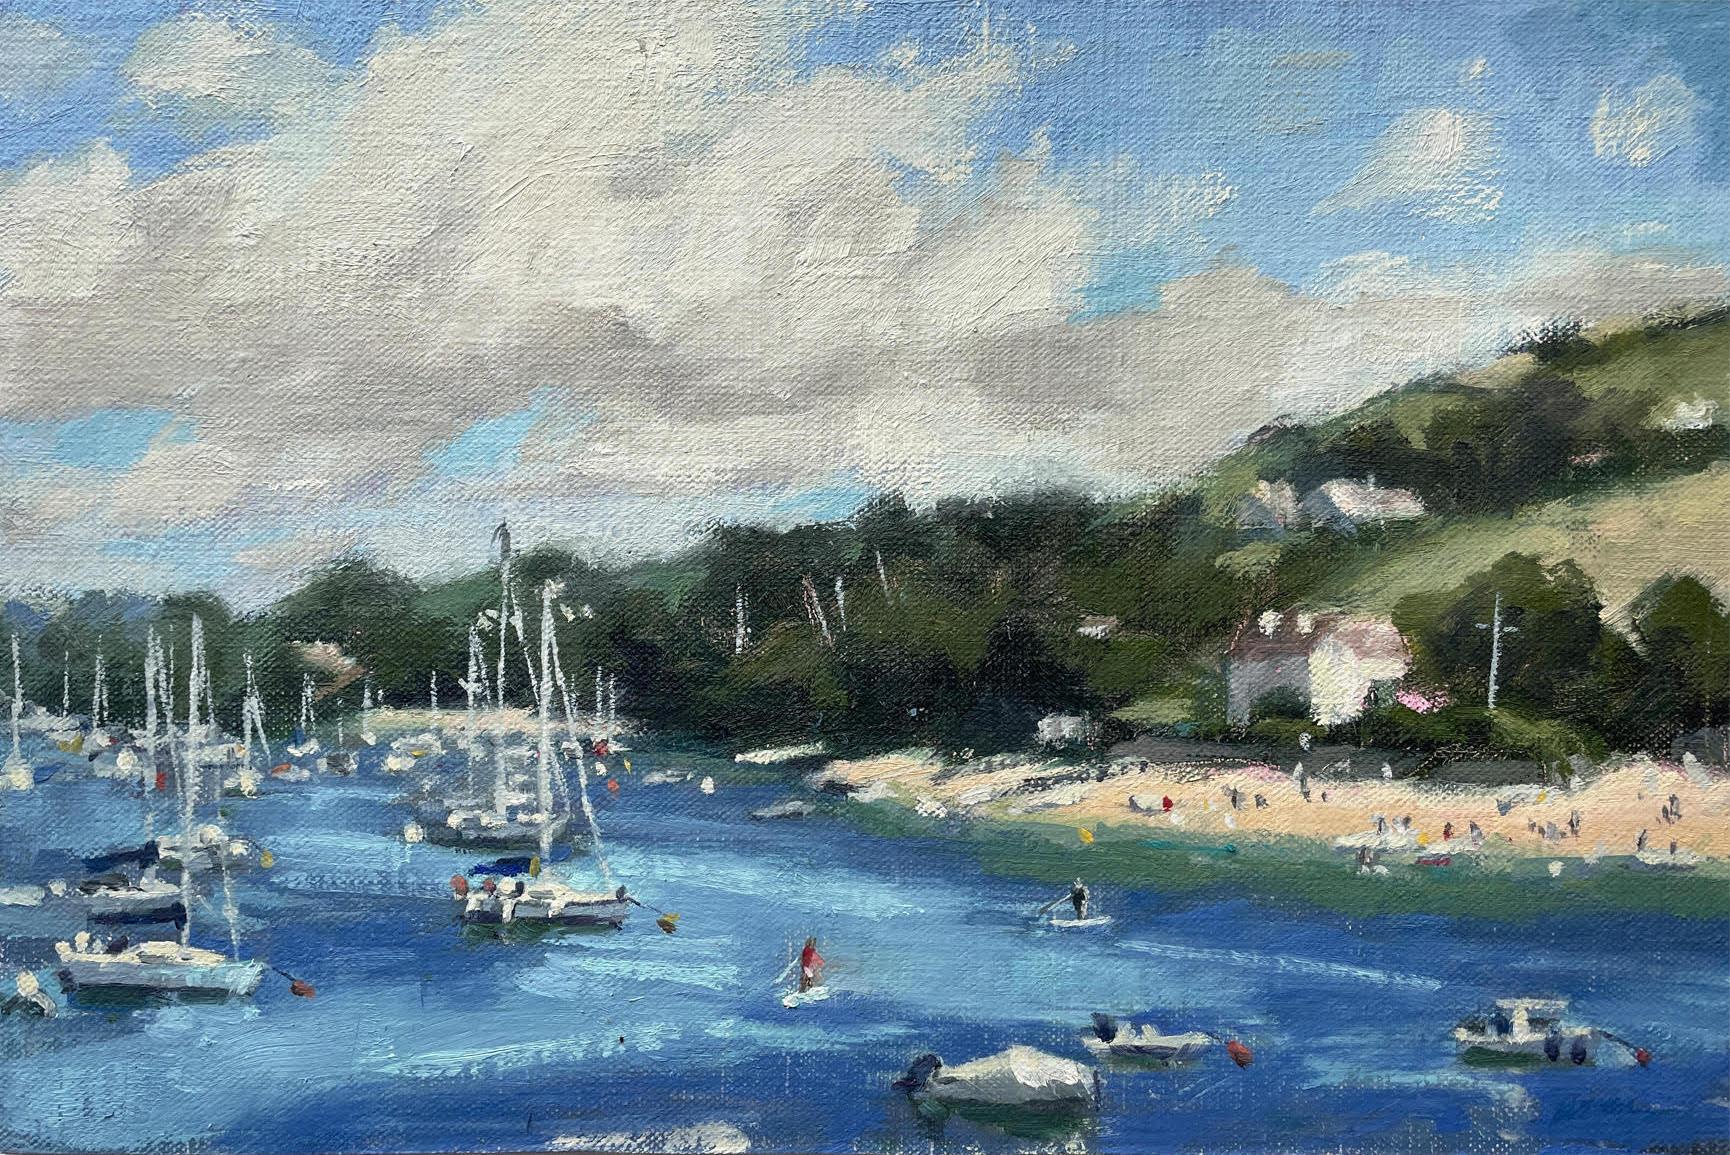 Fiona Carver Landscape Painting - Summer in Salcombe, Original painting, Framed oil painting, Seascape, Coastal